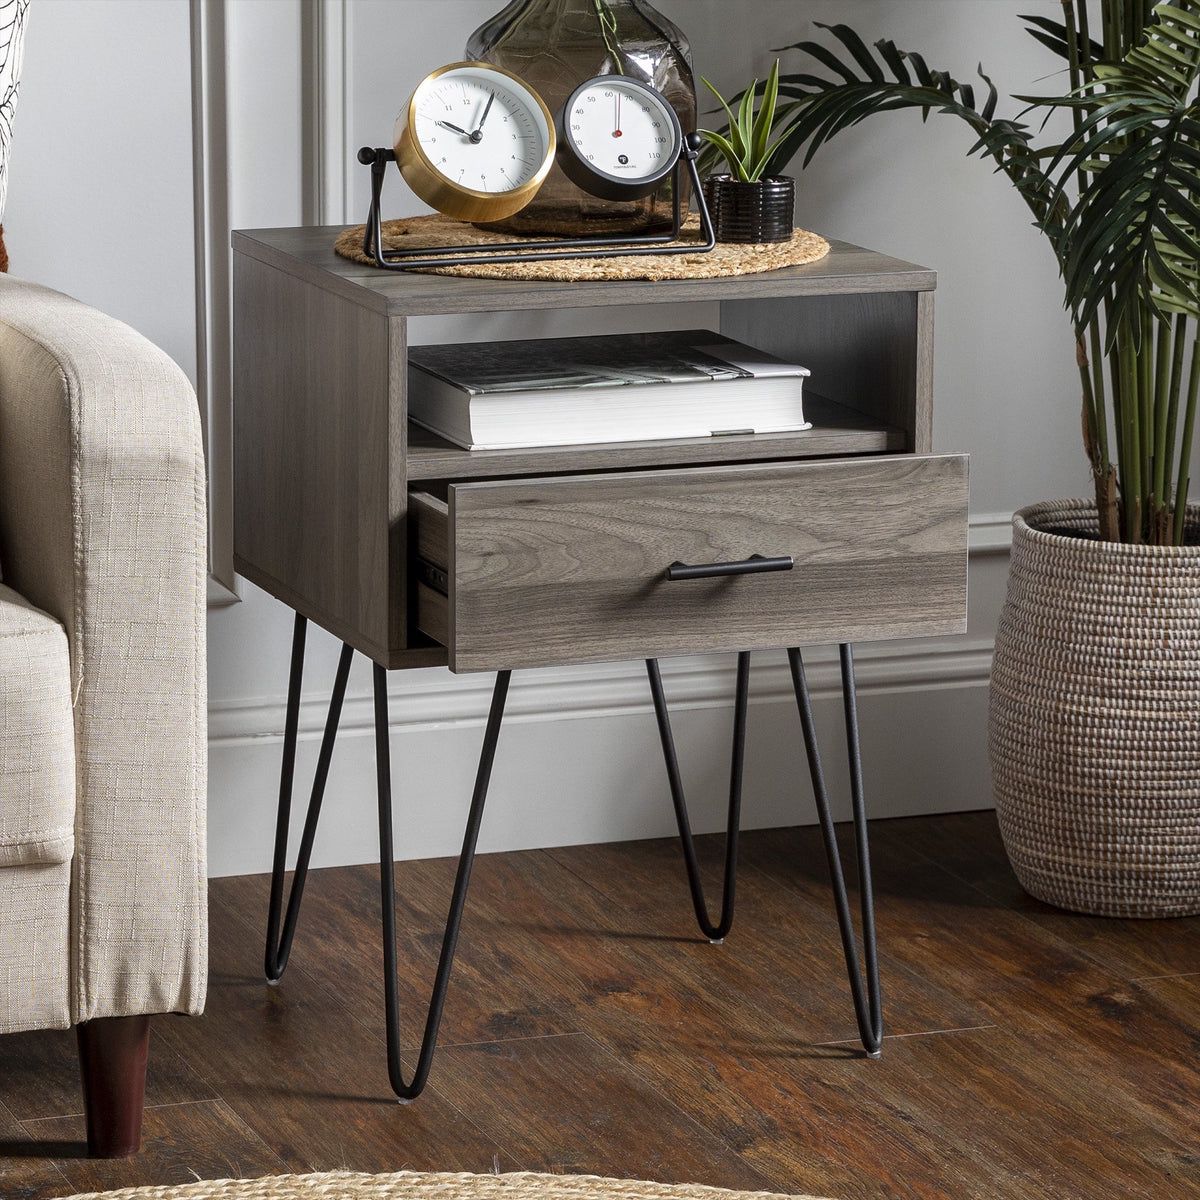 New Nightstand or Side Table - Hairpin 1 Drawer 